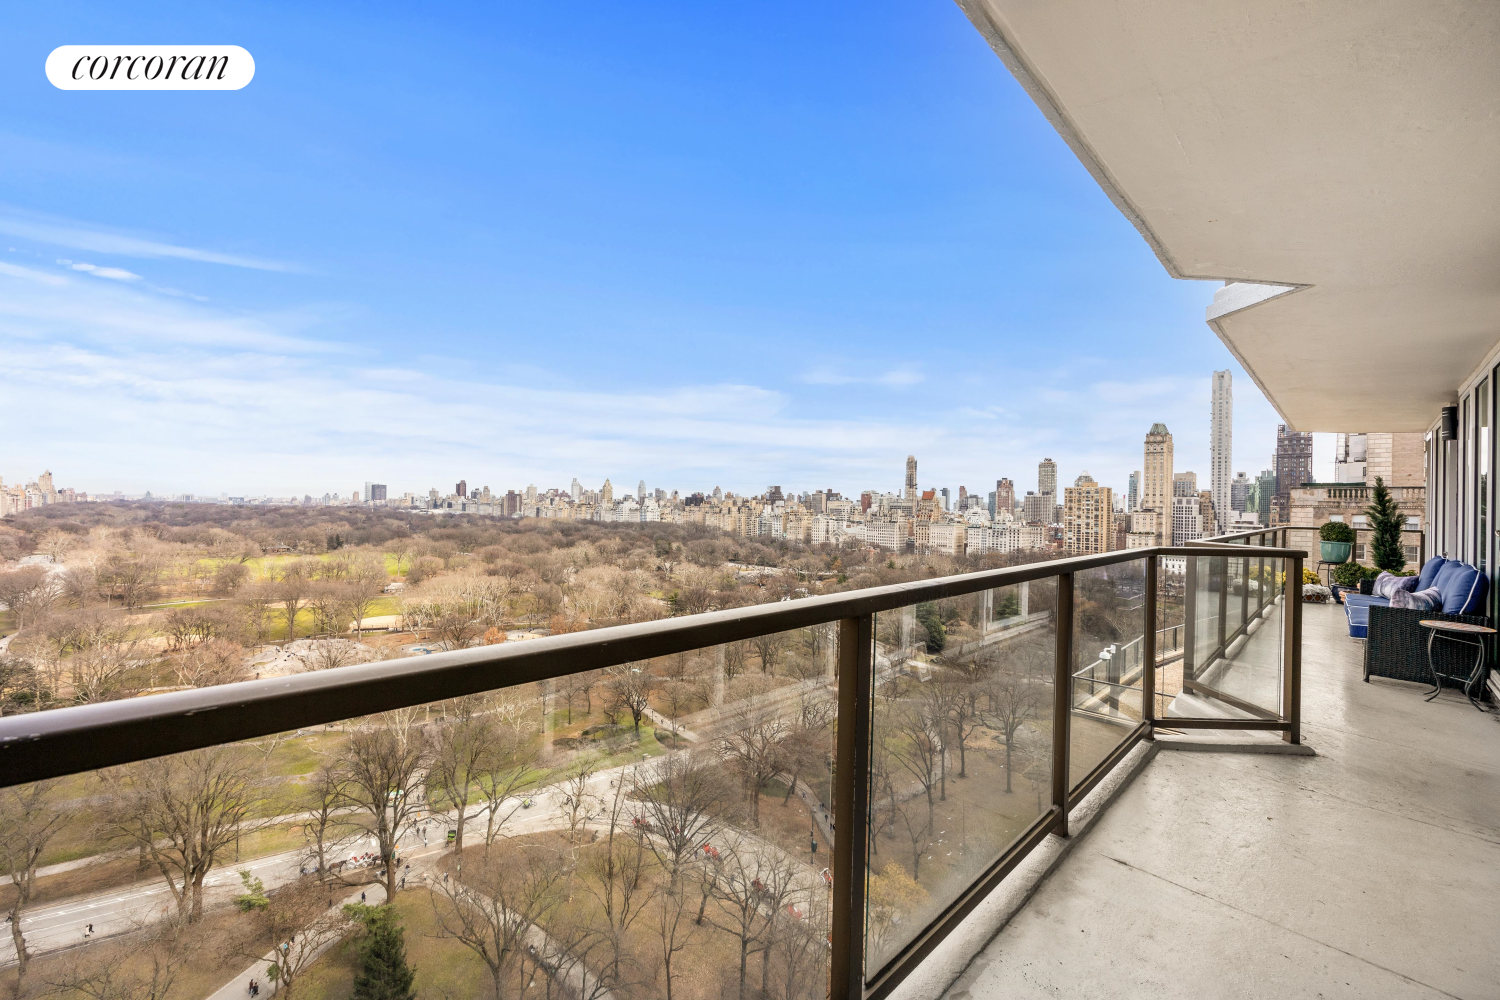 210 Central Park 23Cd, Central Park South, Midtown West, NYC - 2 Bedrooms  
2.5 Bathrooms  
8 Rooms - 